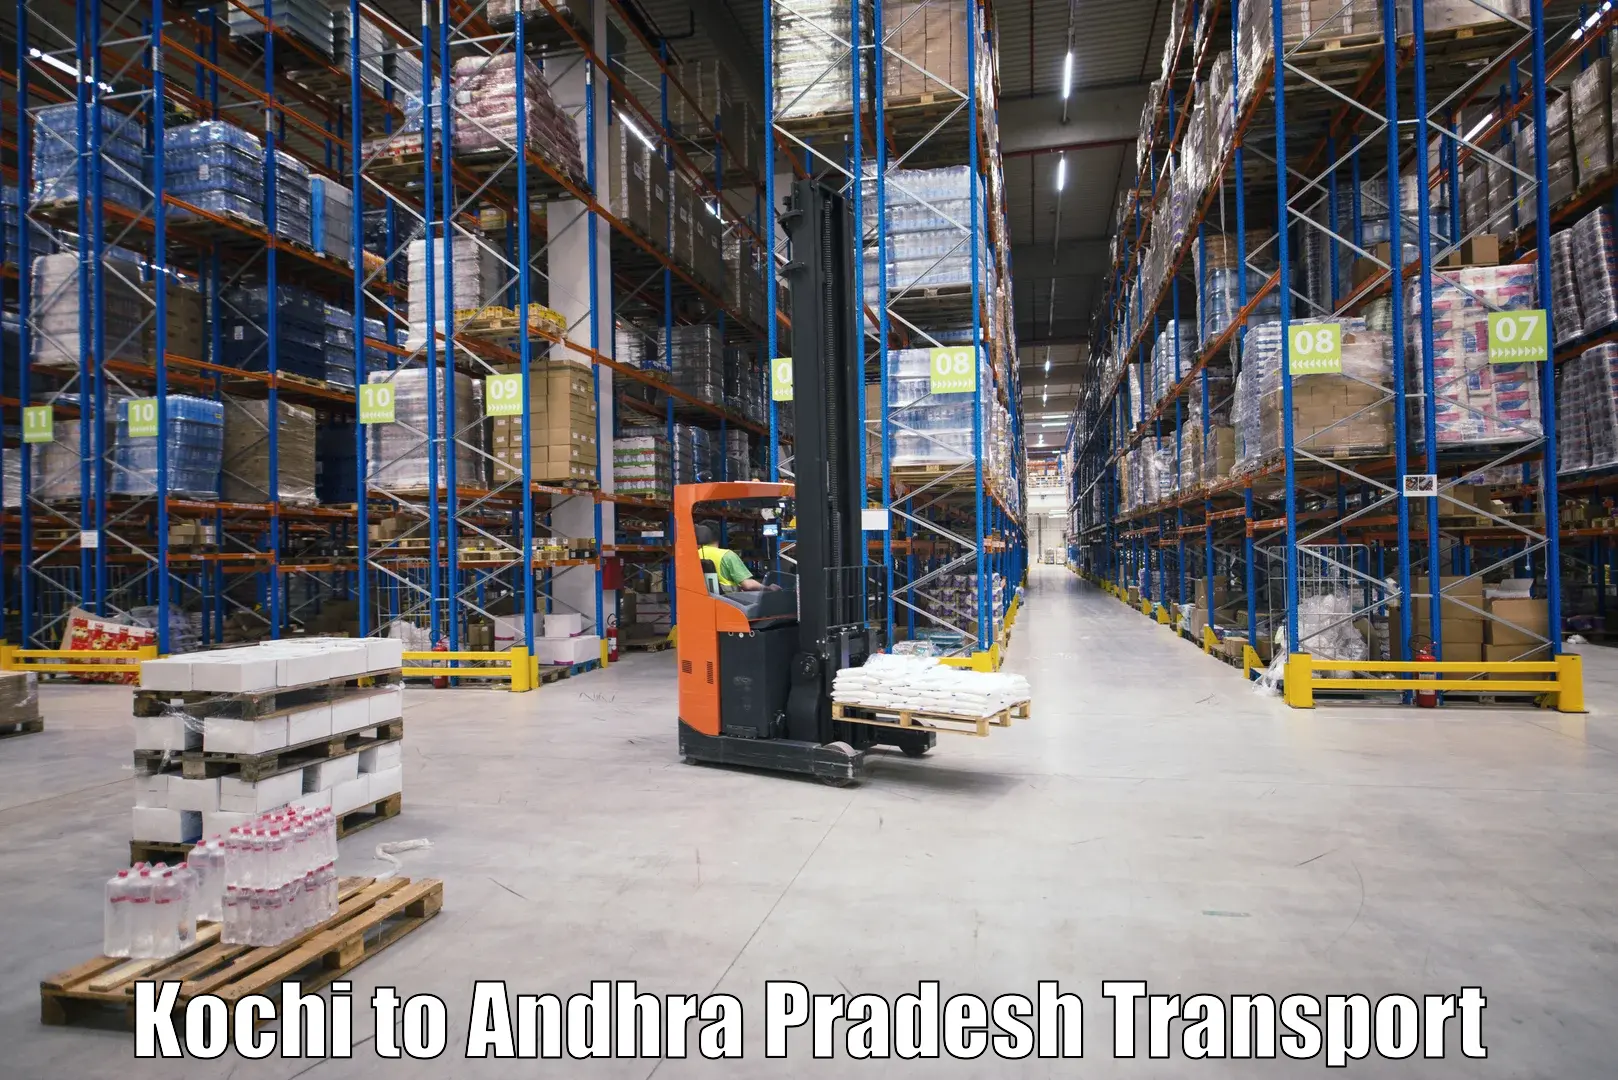 Road transport online services Kochi to Pathapatnam